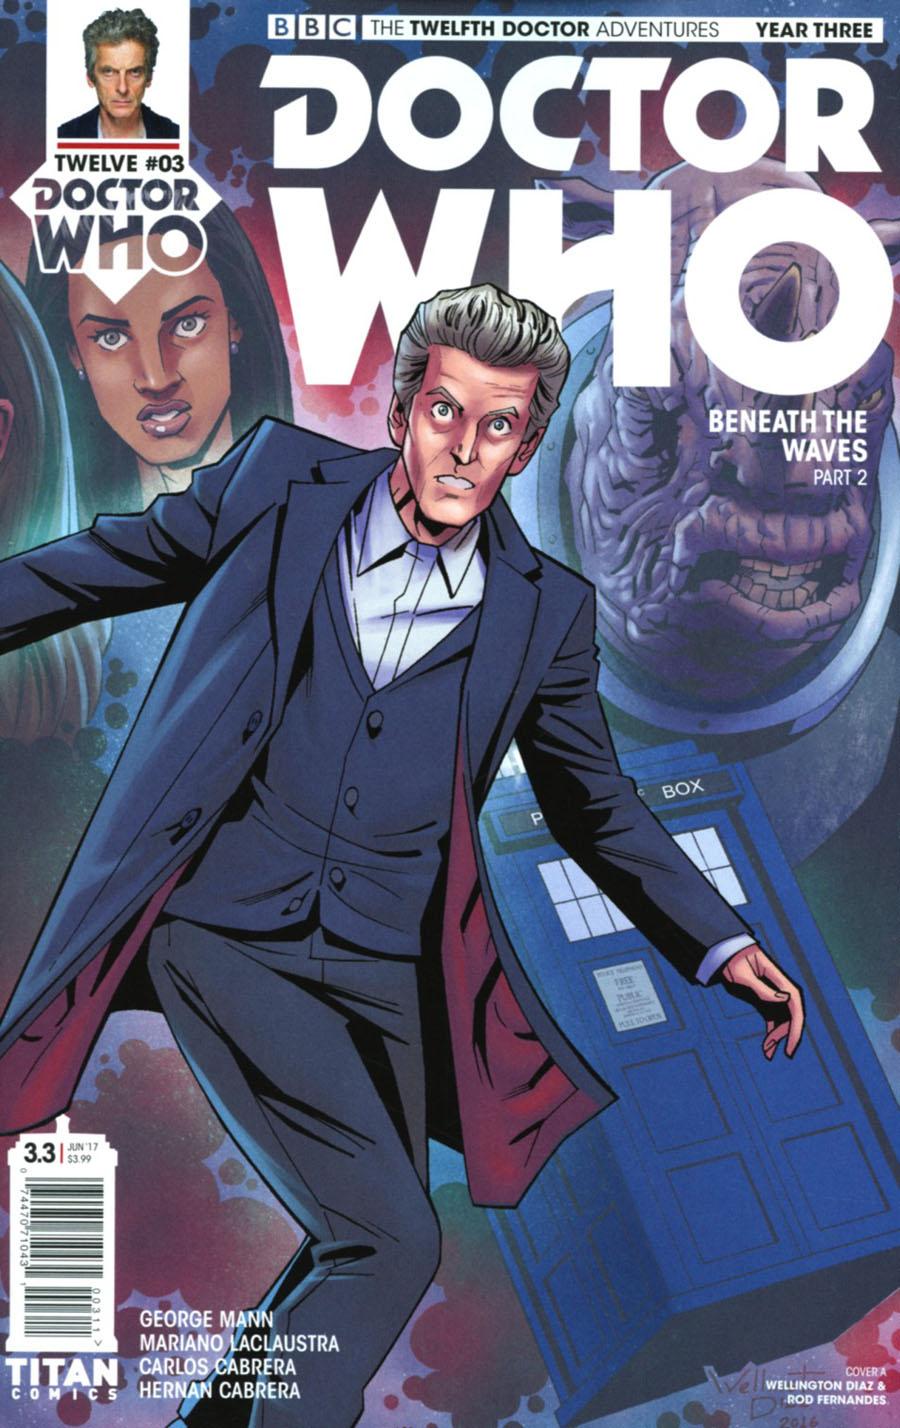 Doctor Who 12th Doctor Year Three Vol. 1 #3